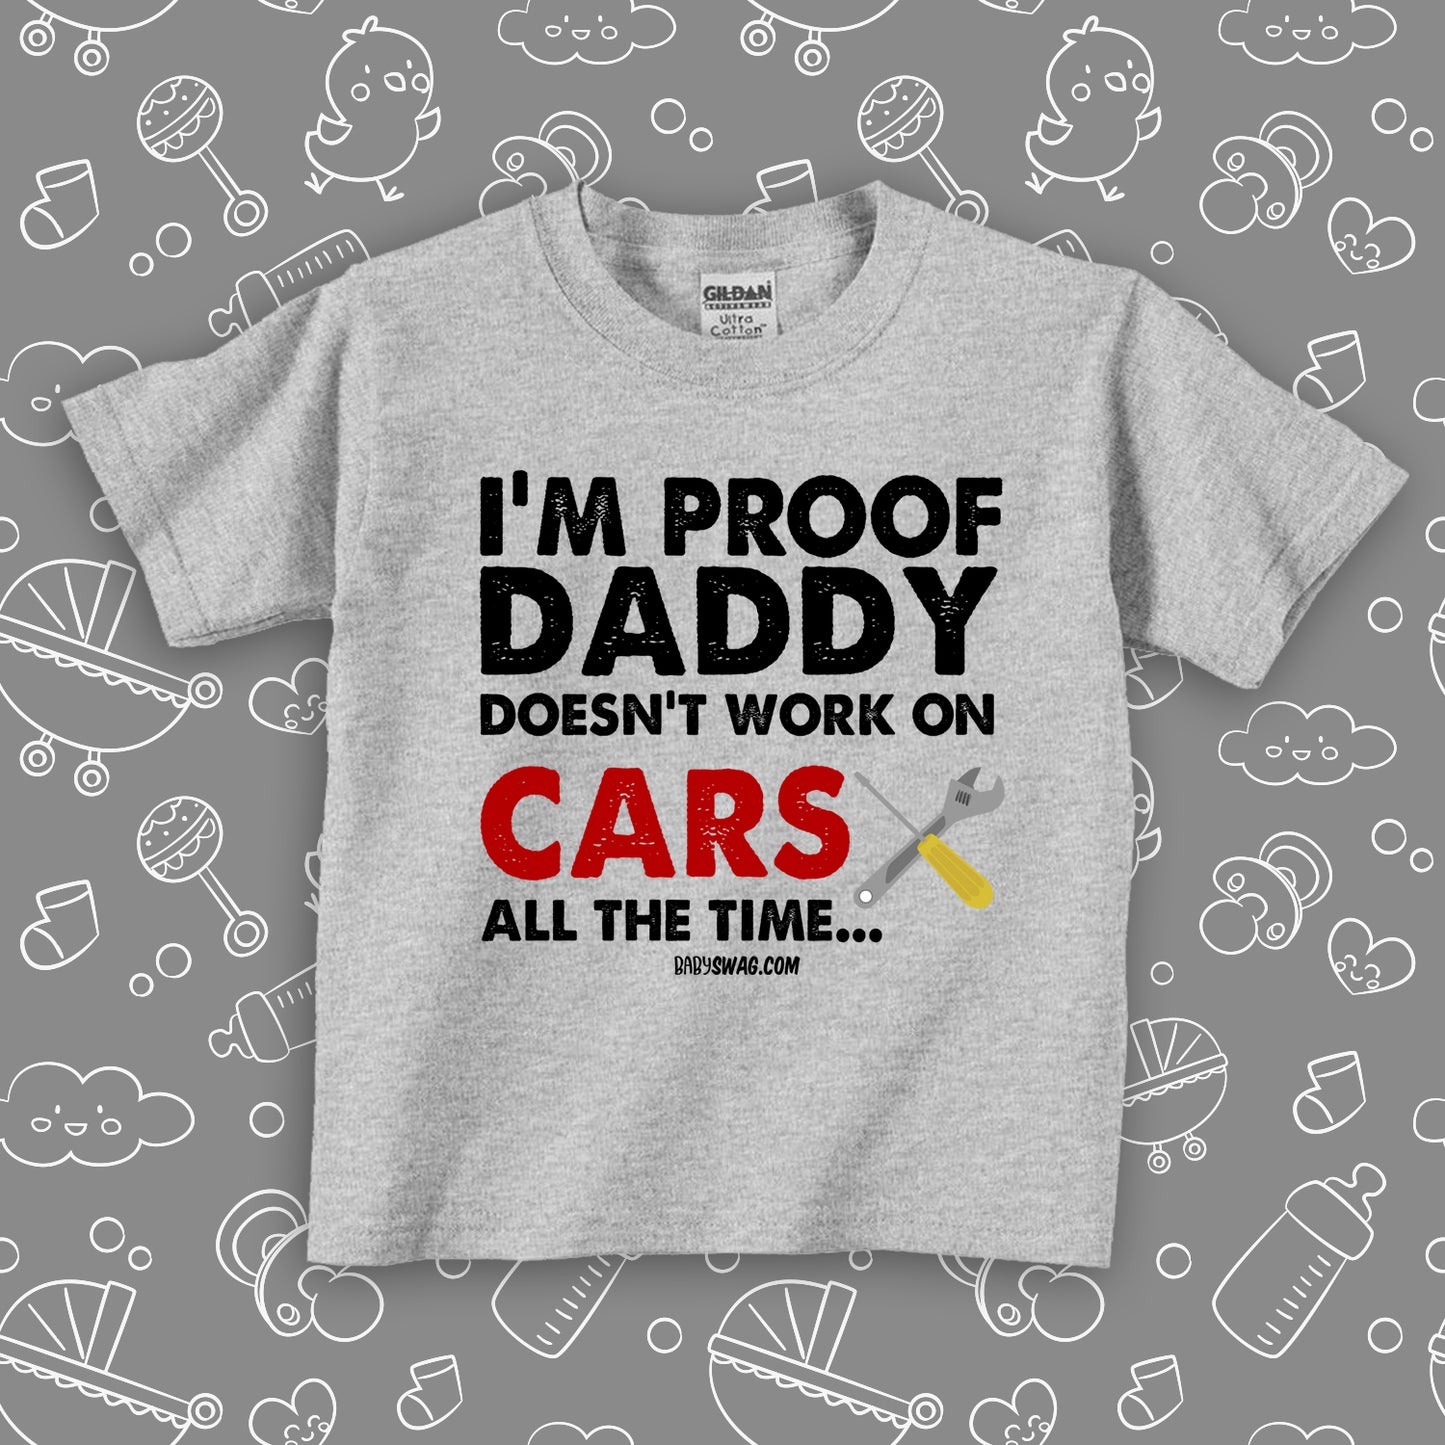 Grey cool toddler shirt saying "I'm Proof Daddy Doesn't Always Work On Cars All The Time". 